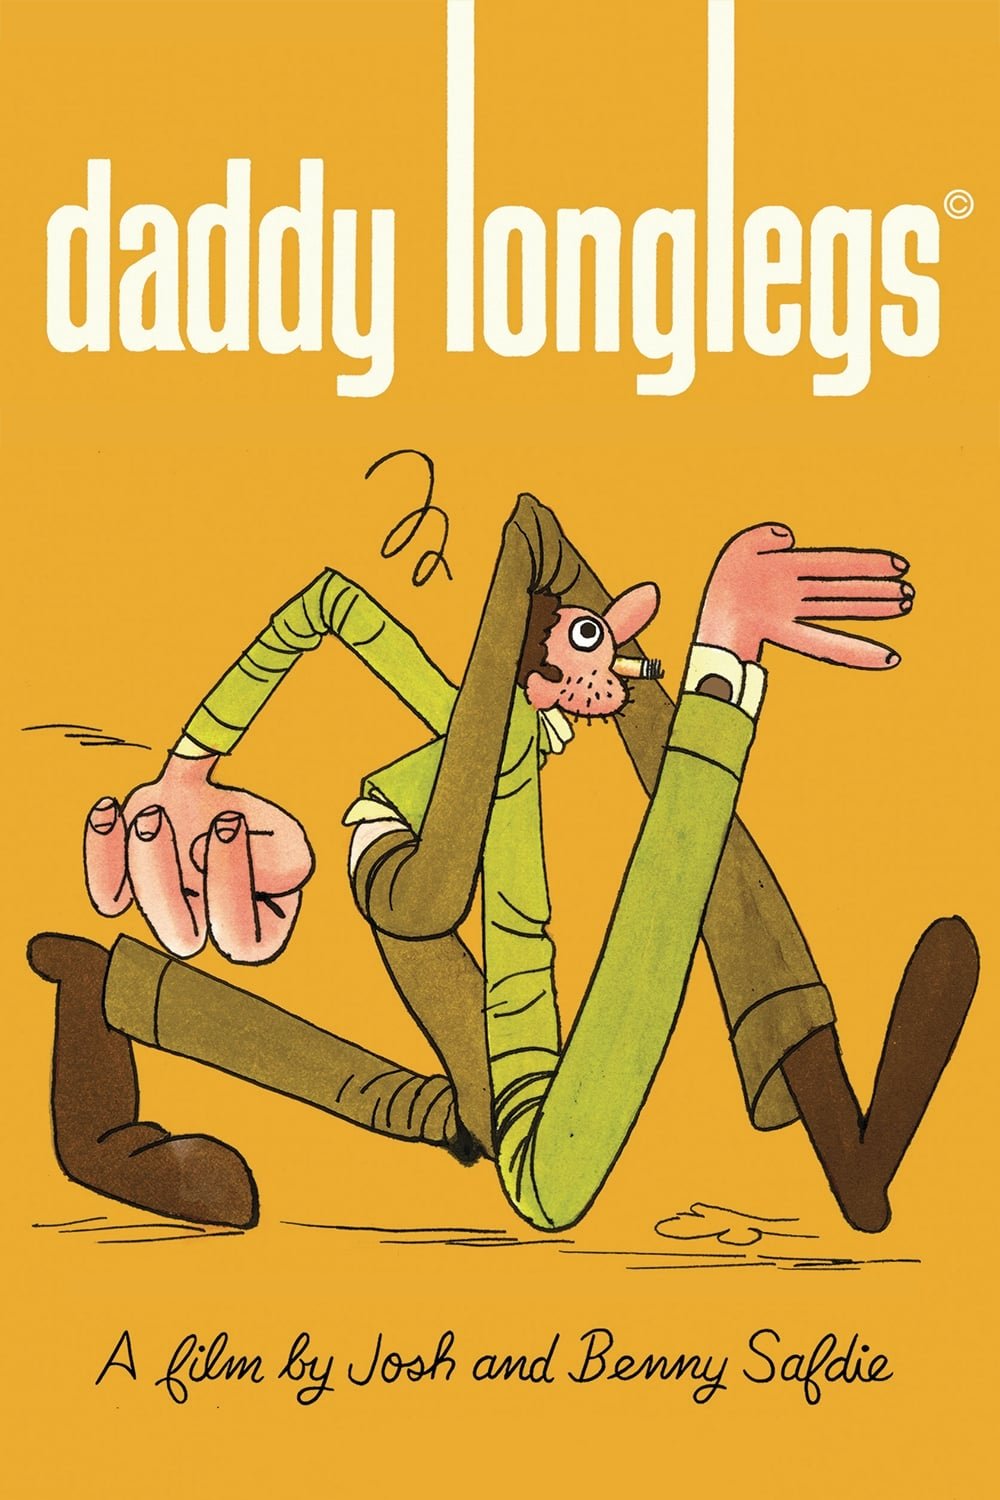 Poster of the movie Daddy Longlegs